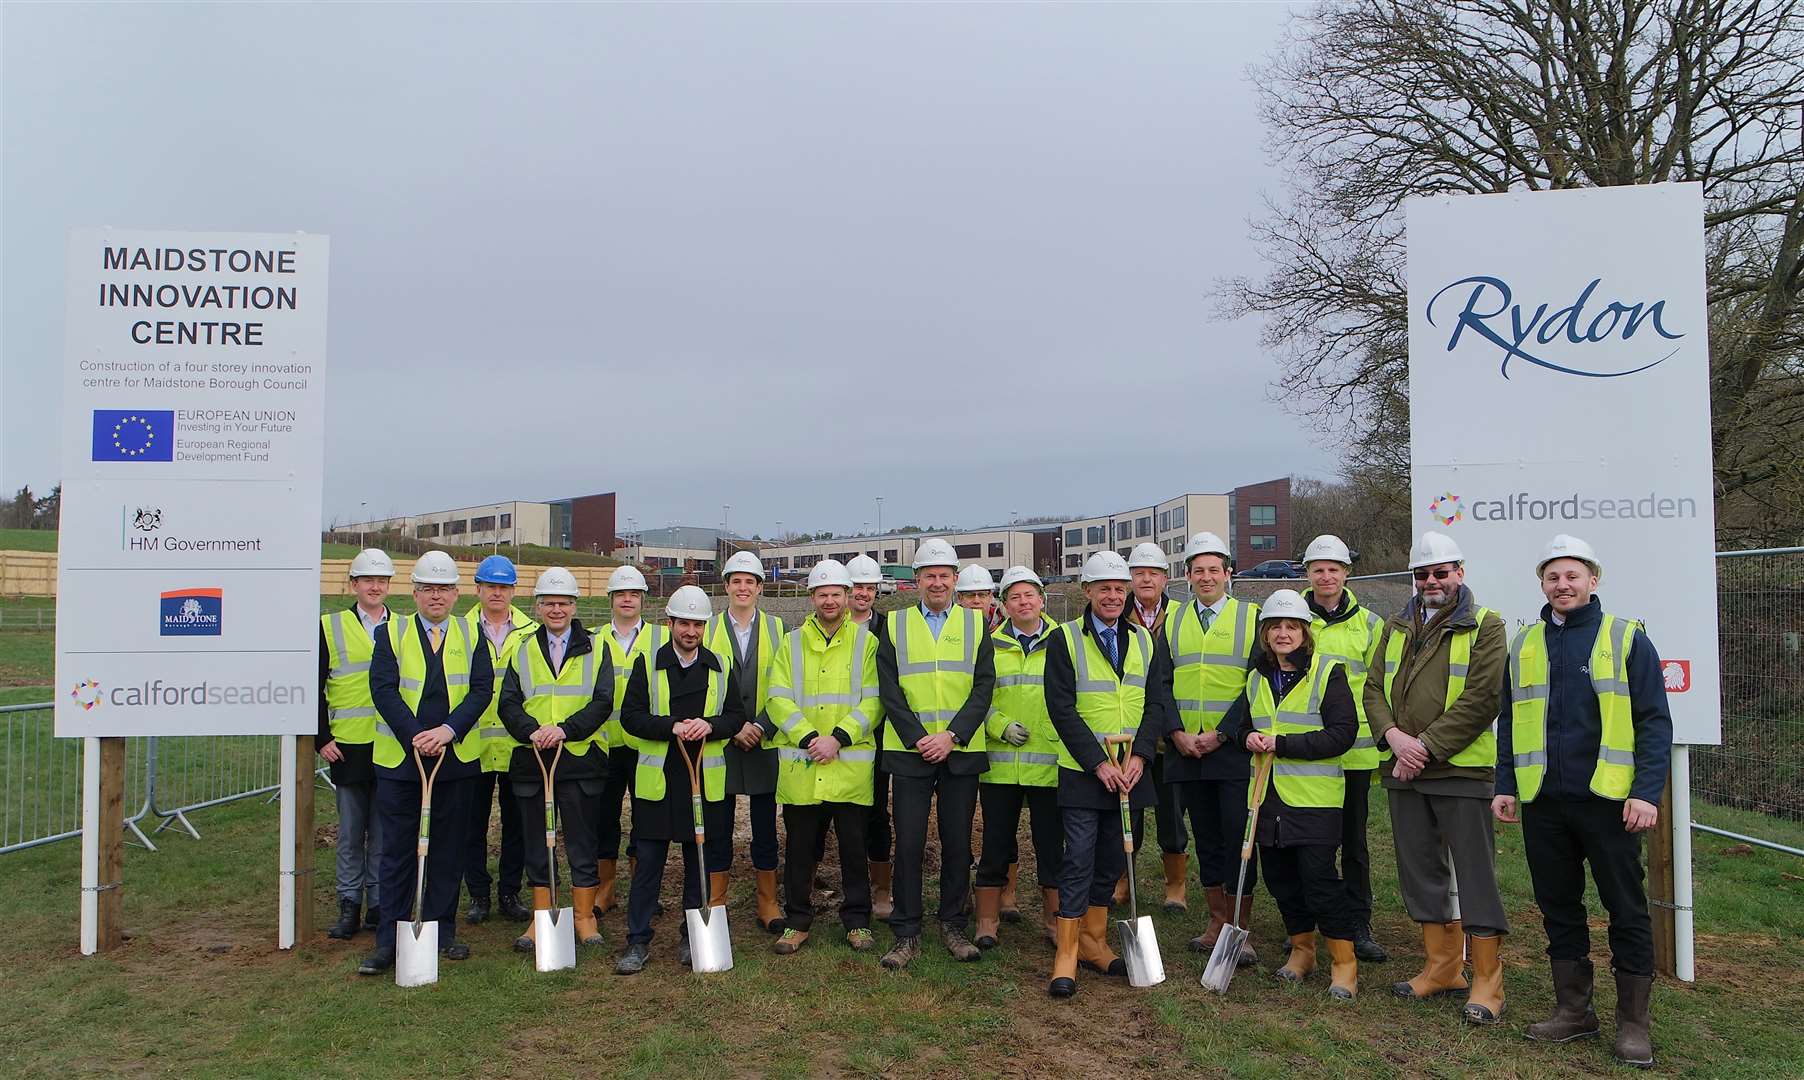 A ground breaking ceremony took place at the Maidstone Innovation Centre this week